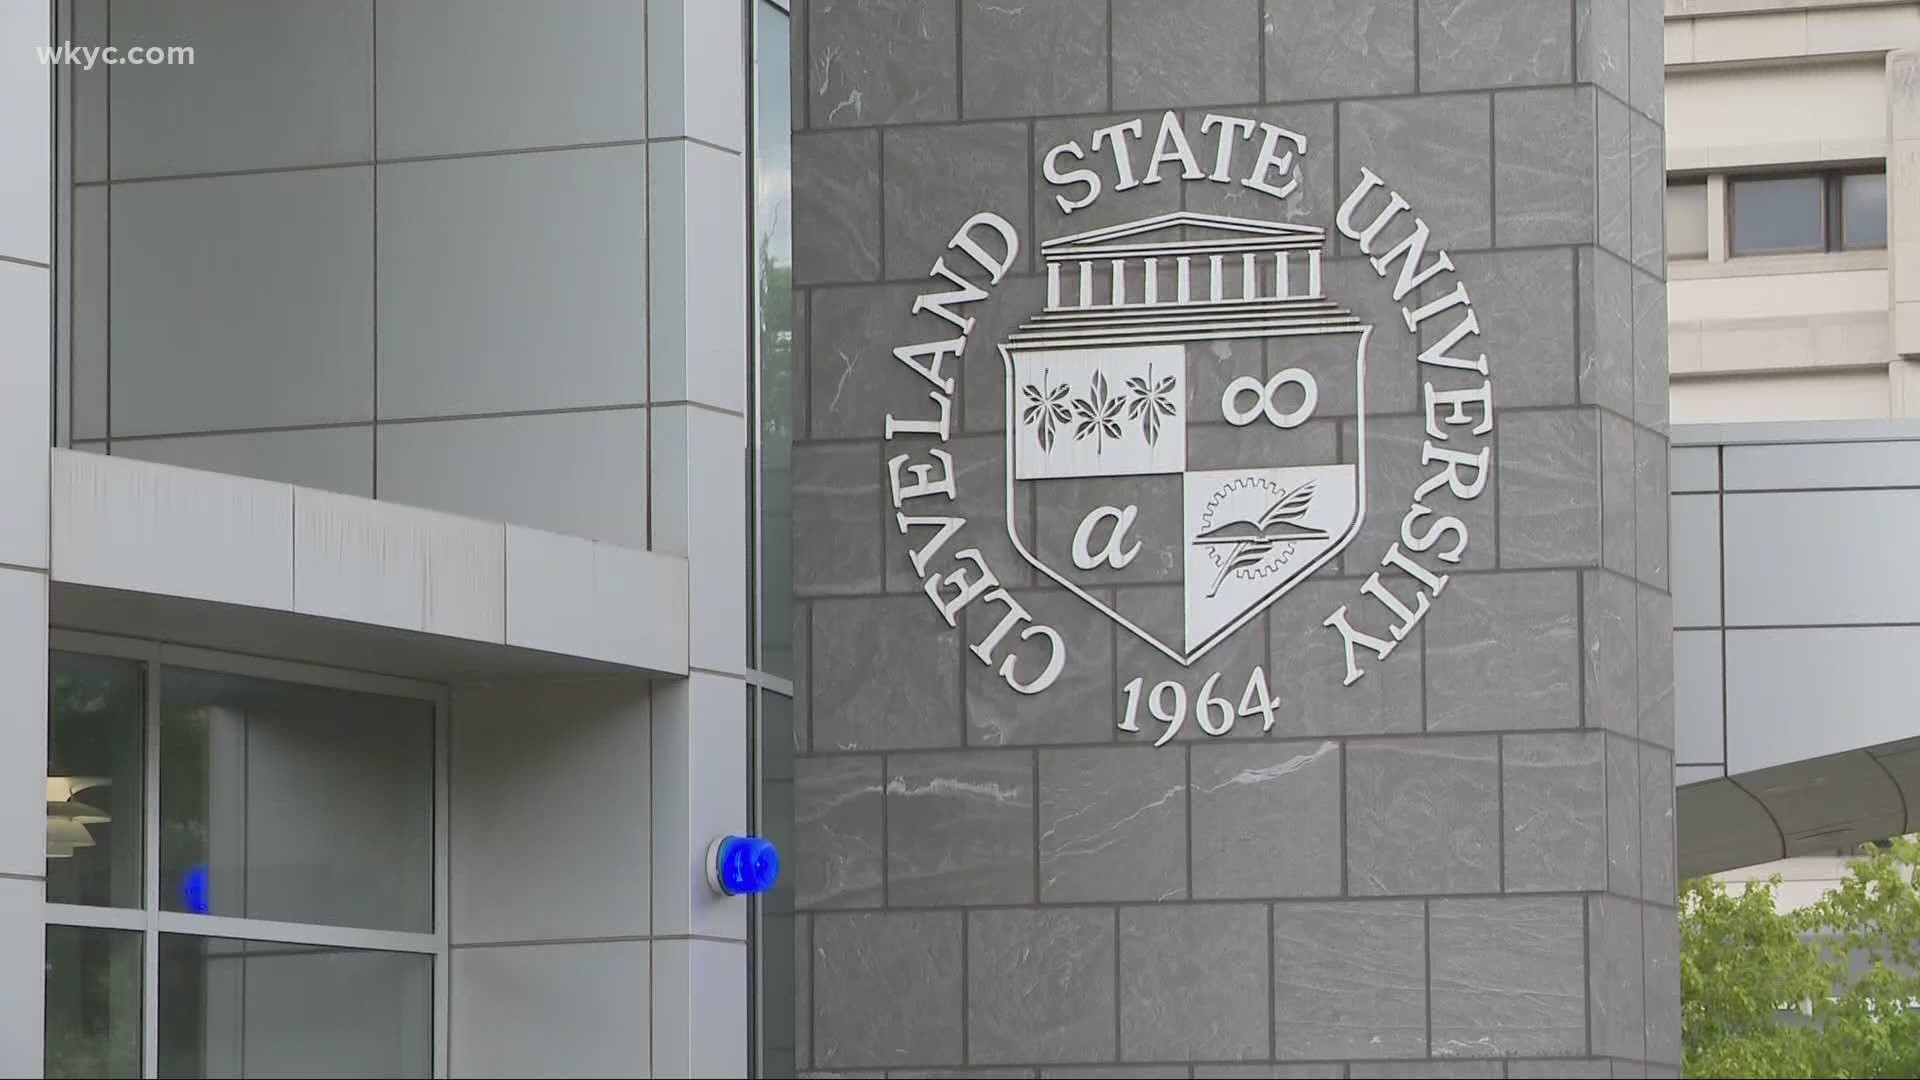 As public schools wait for that guidance from the state, many colleges and universities have already announced their plans for the fall semester. Mark Naymik reports